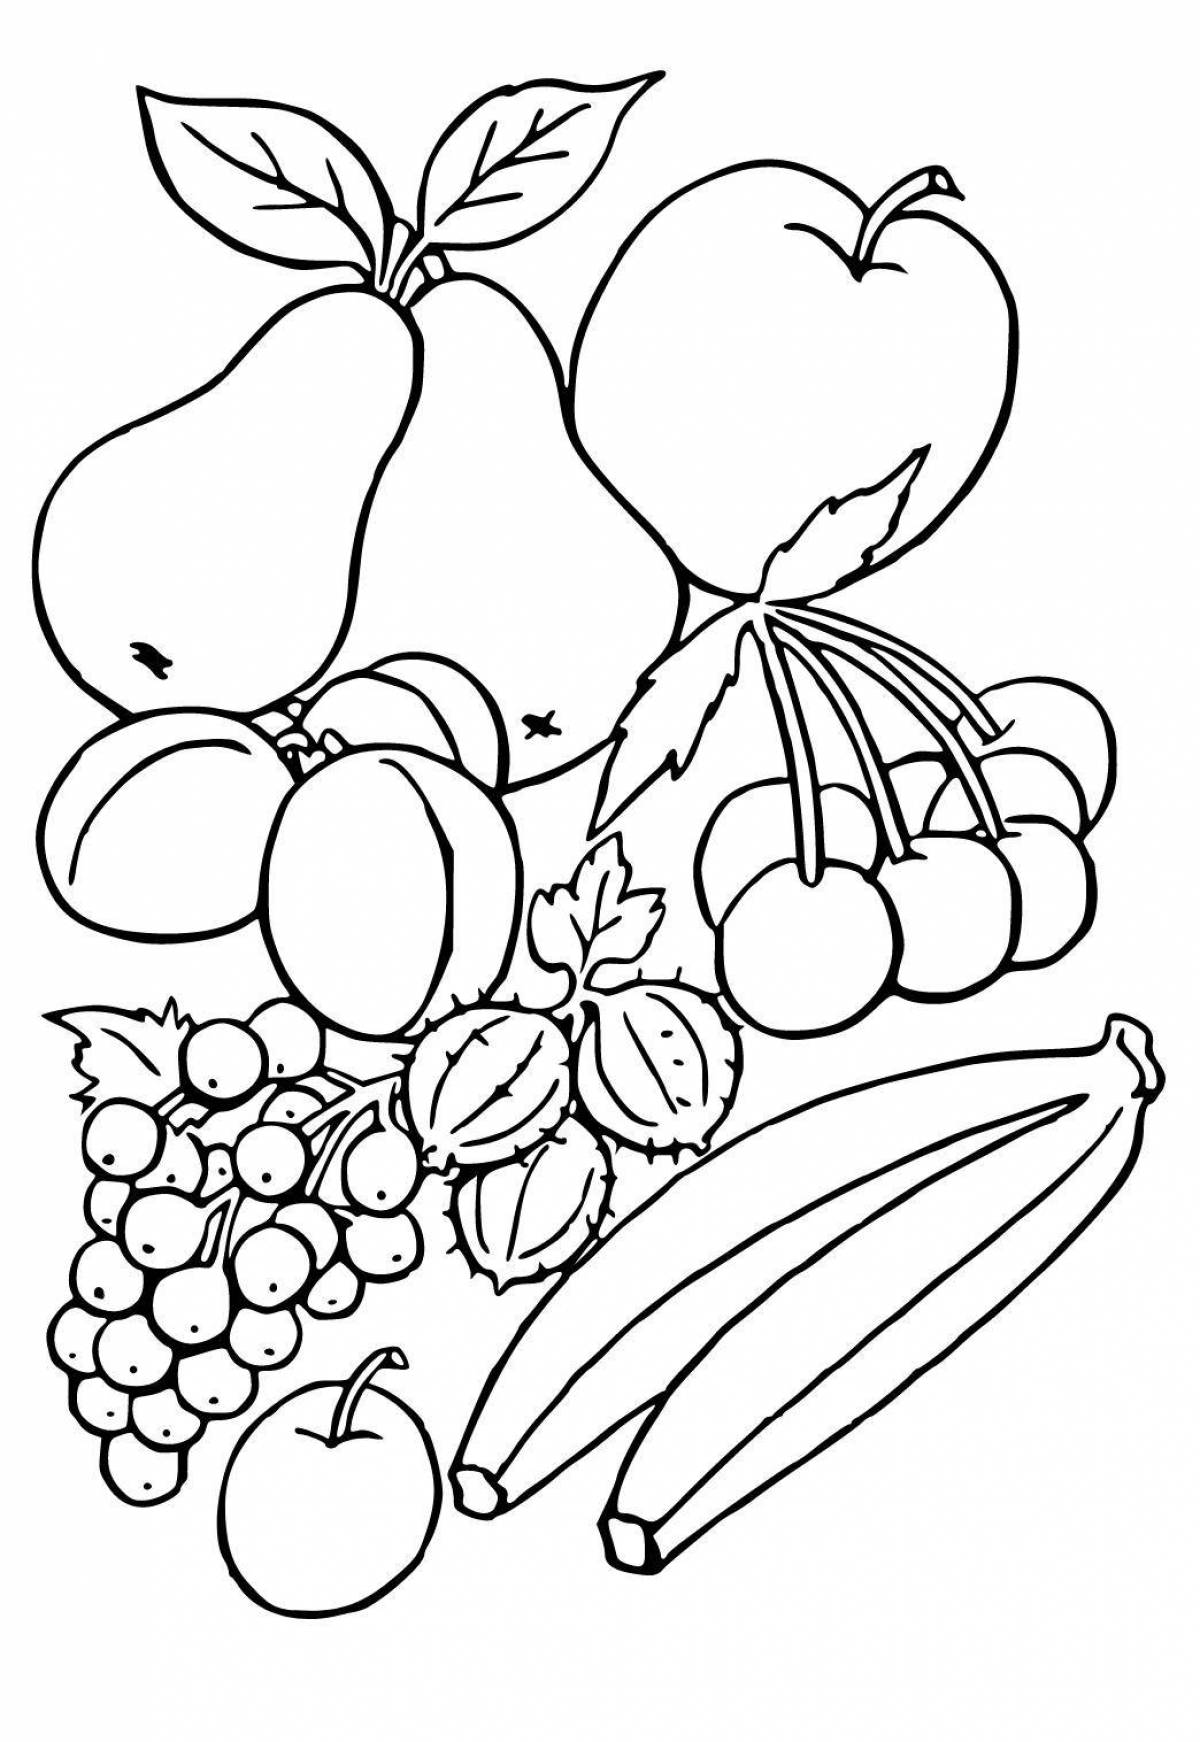 Innovative fruit coloring page for 6-7 year olds